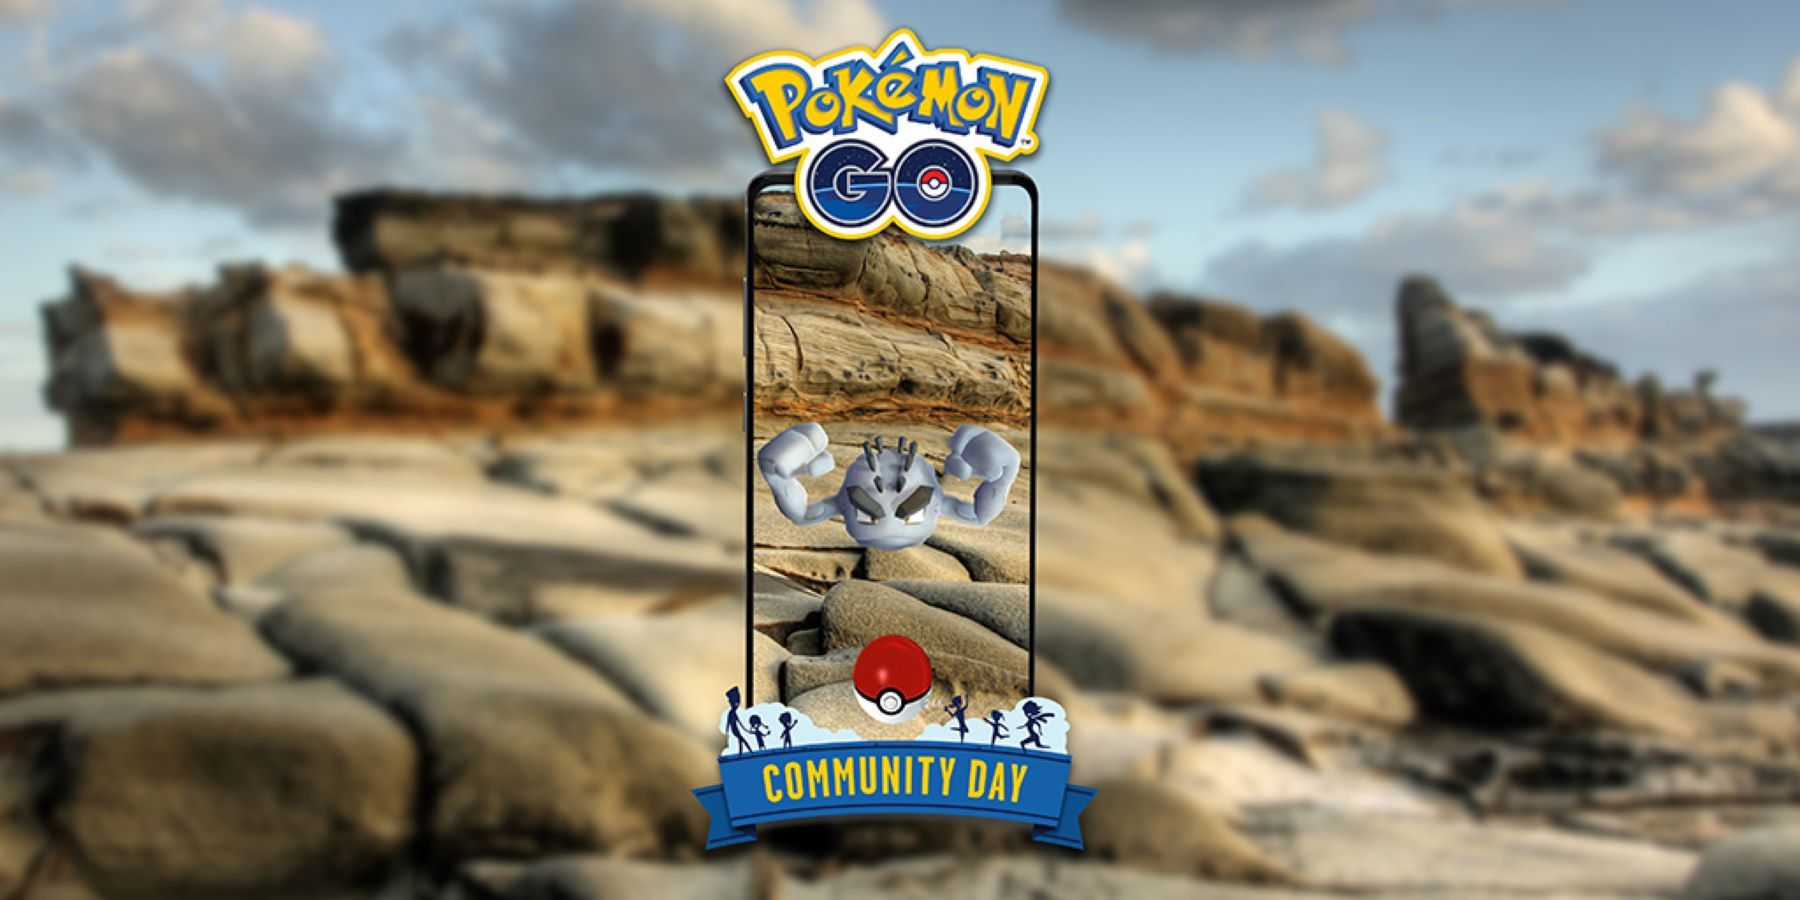 Official art for the May 2022 Pokemon GO Community Day starring Alolan Geodude